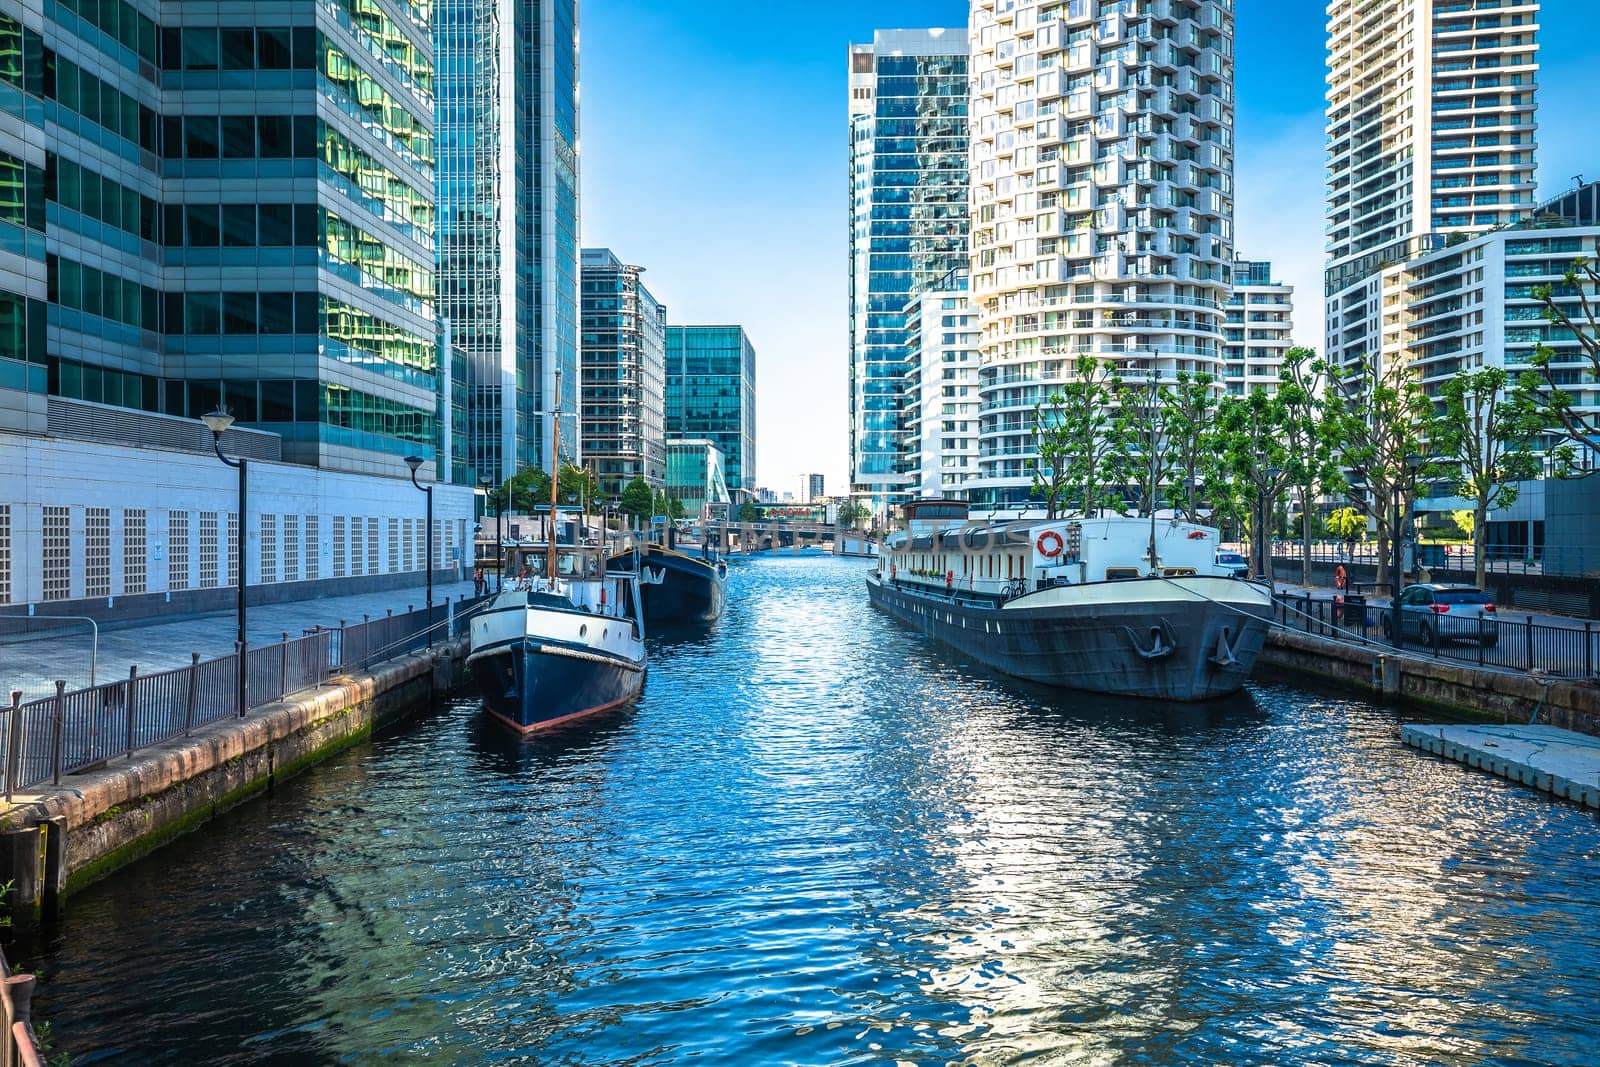 Canary Wharf financial district of London skyscrapers and canal view by xbrchx